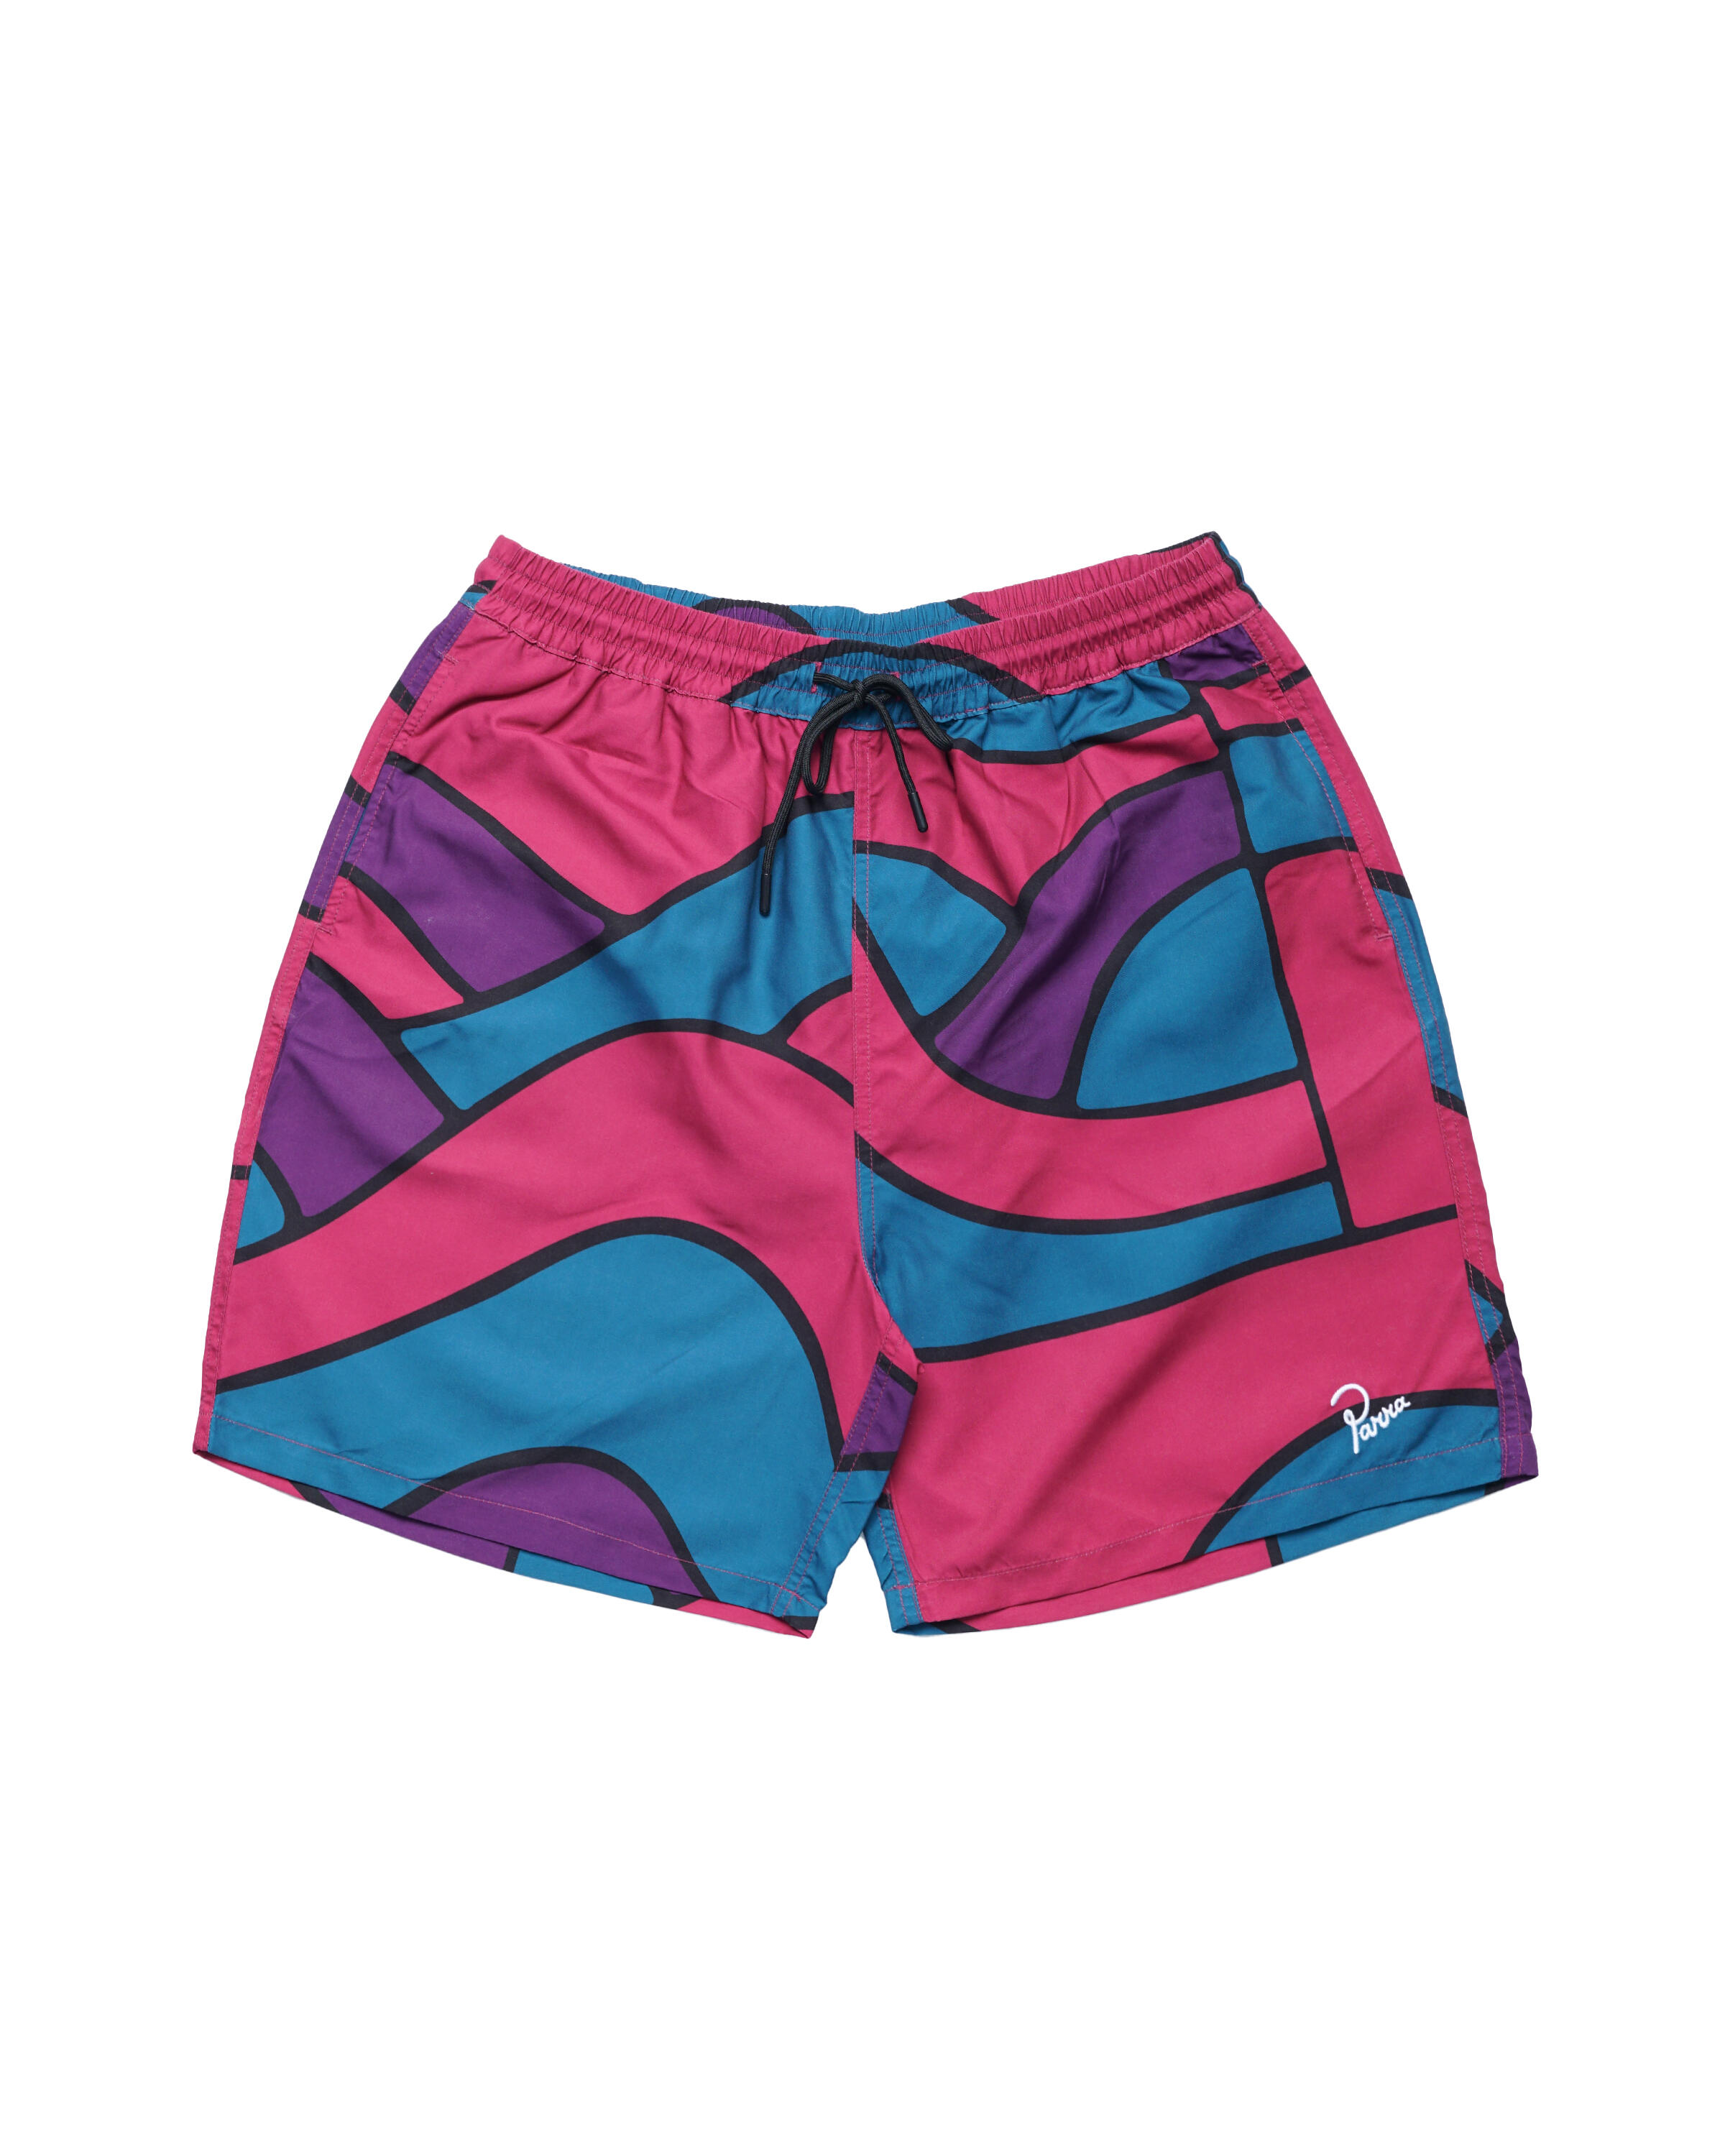 by Parra mountain waves swim shorts